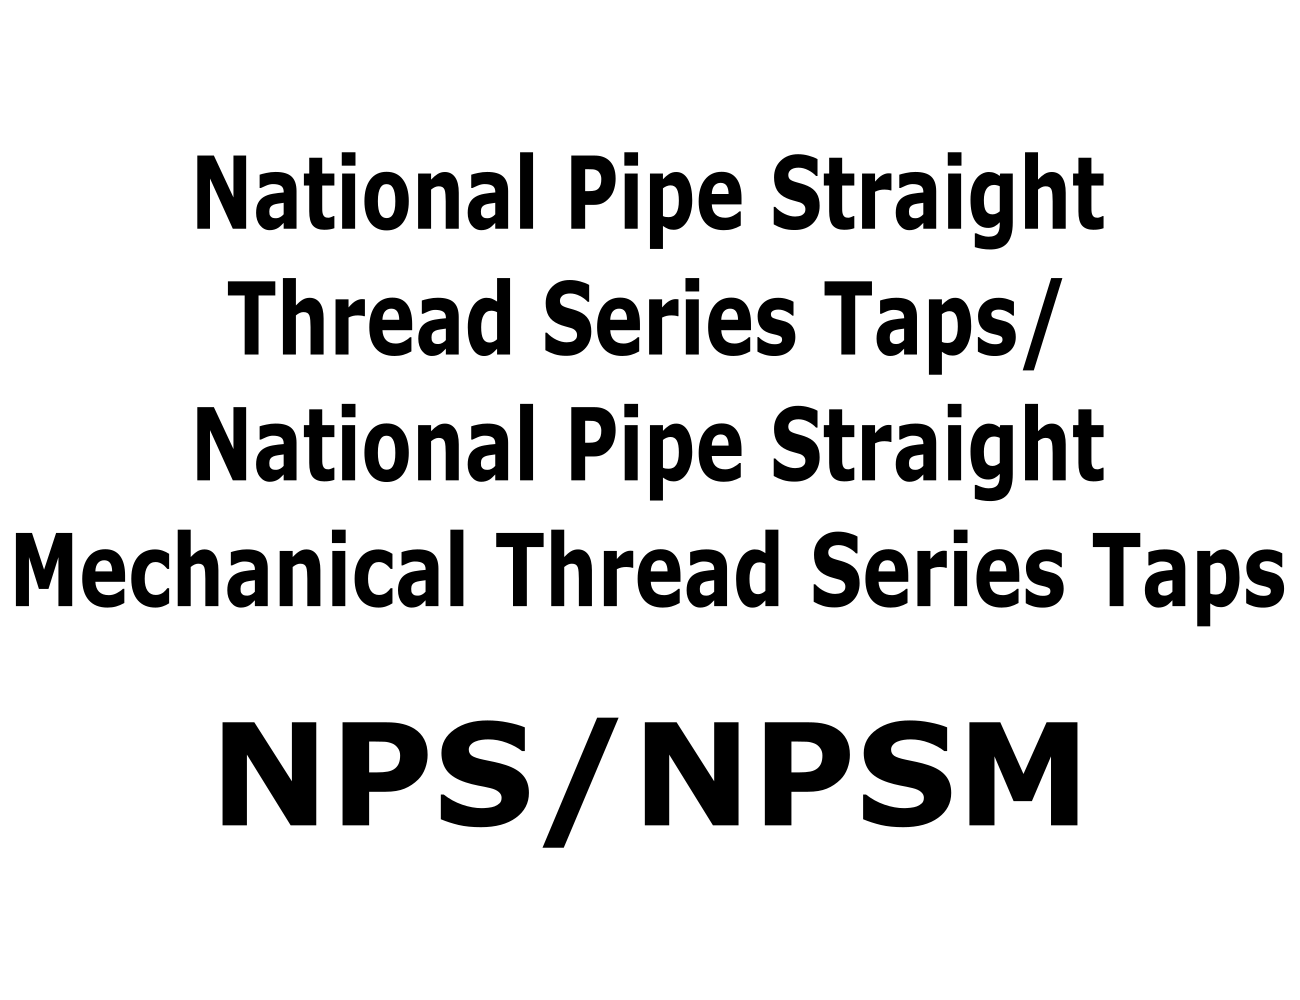 National Pipe Straight Thread Series NPS/NPSM